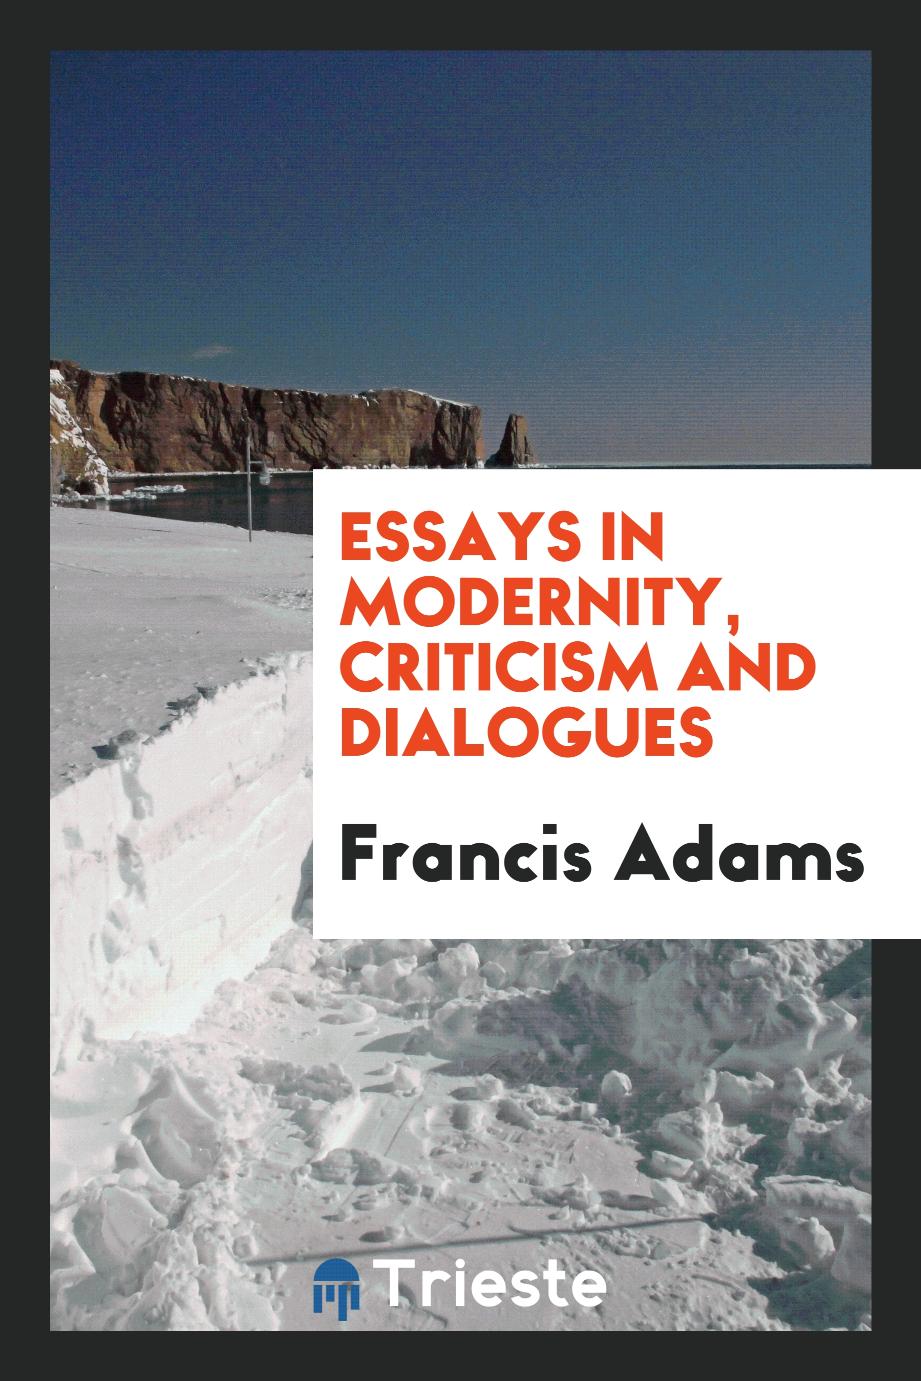 Essays in modernity, criticism and dialogues